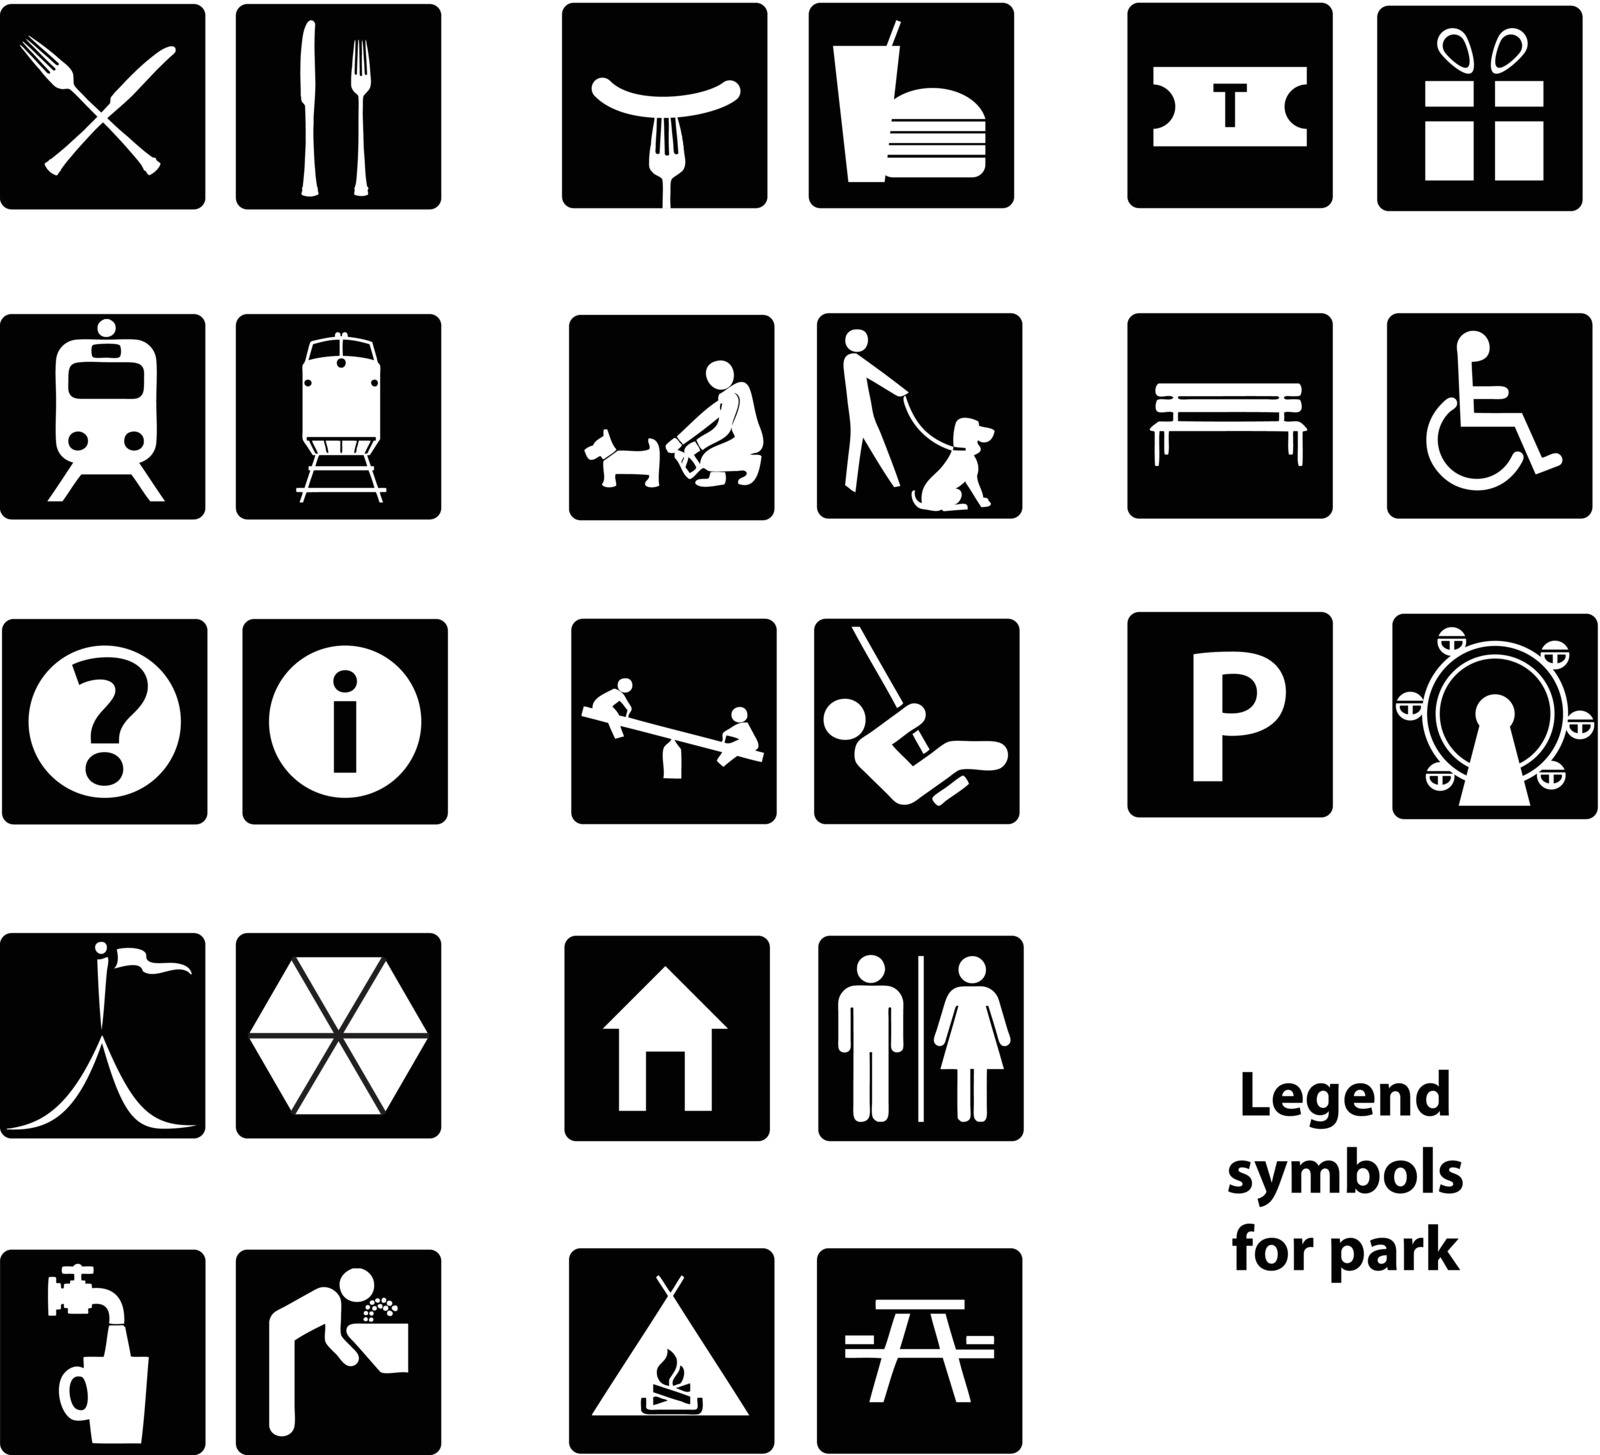 Cartographic symbols in the park. Vector illustration.